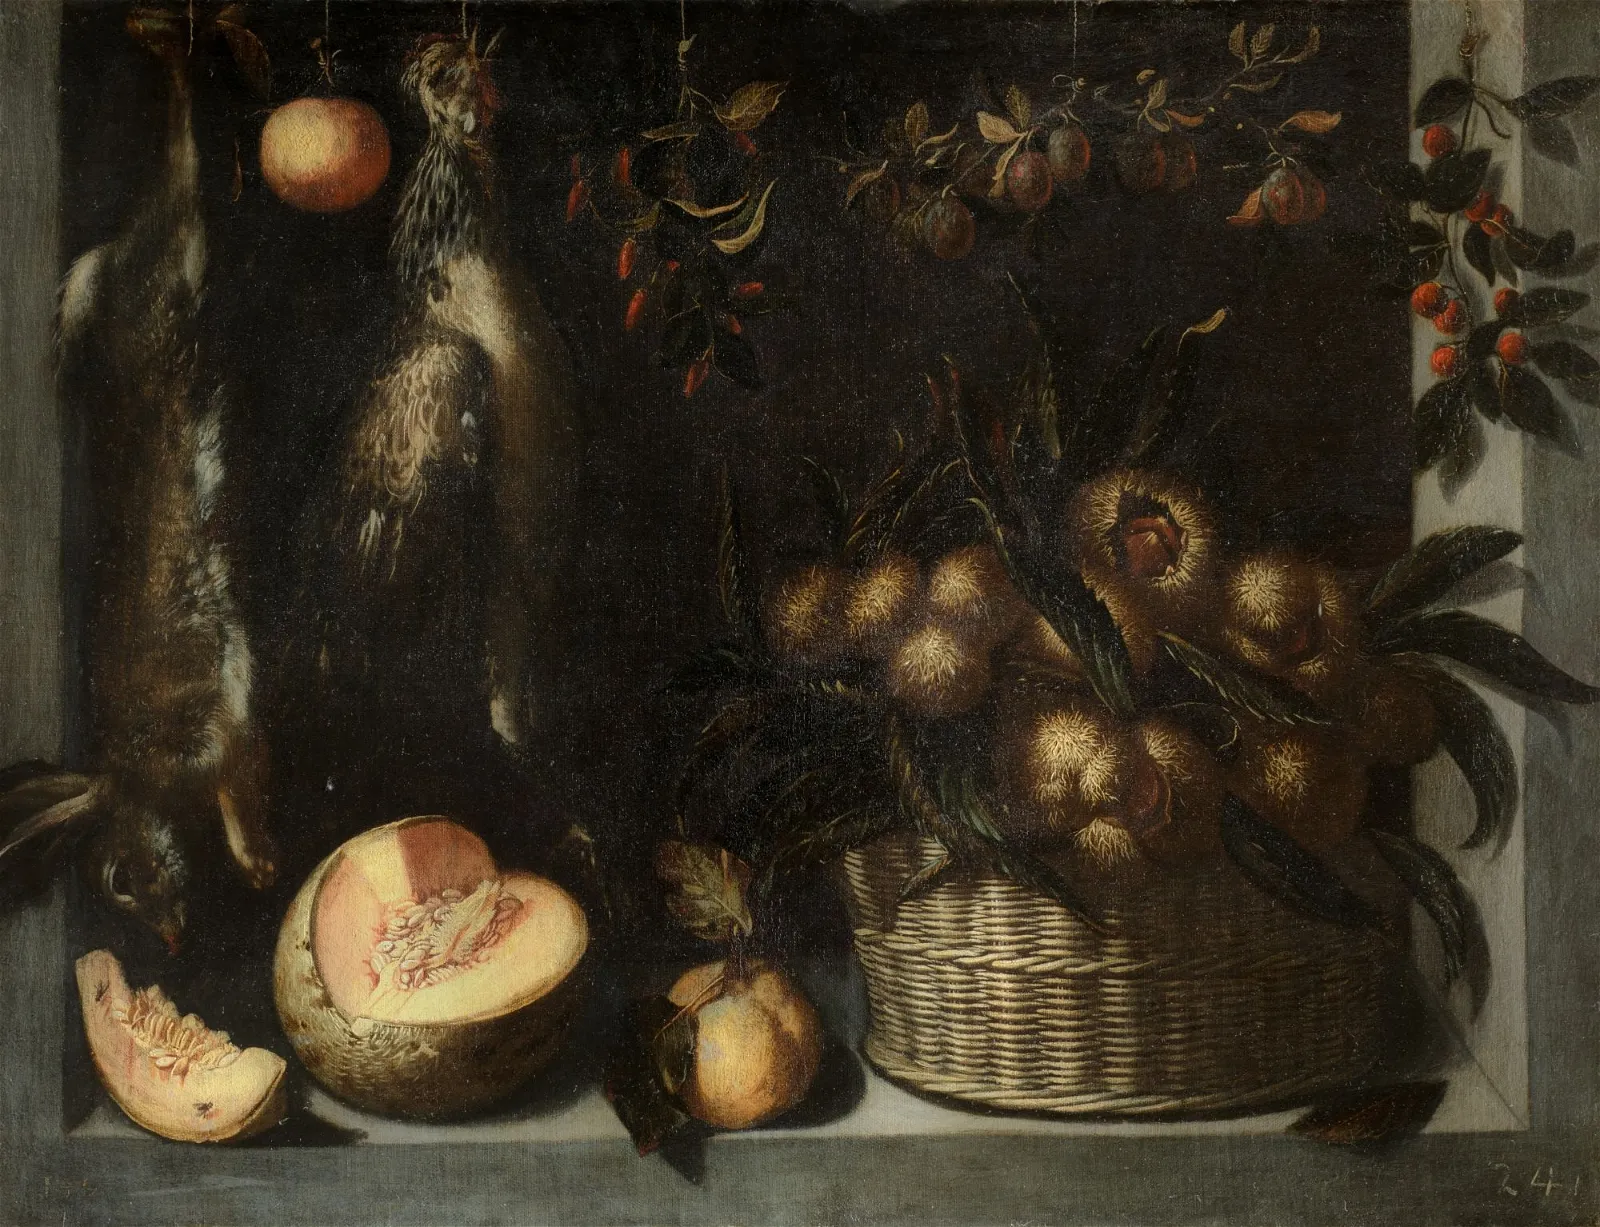 Rediscovered Spanish Golden Age still life comes to market at Ansorena Oct. 3-5